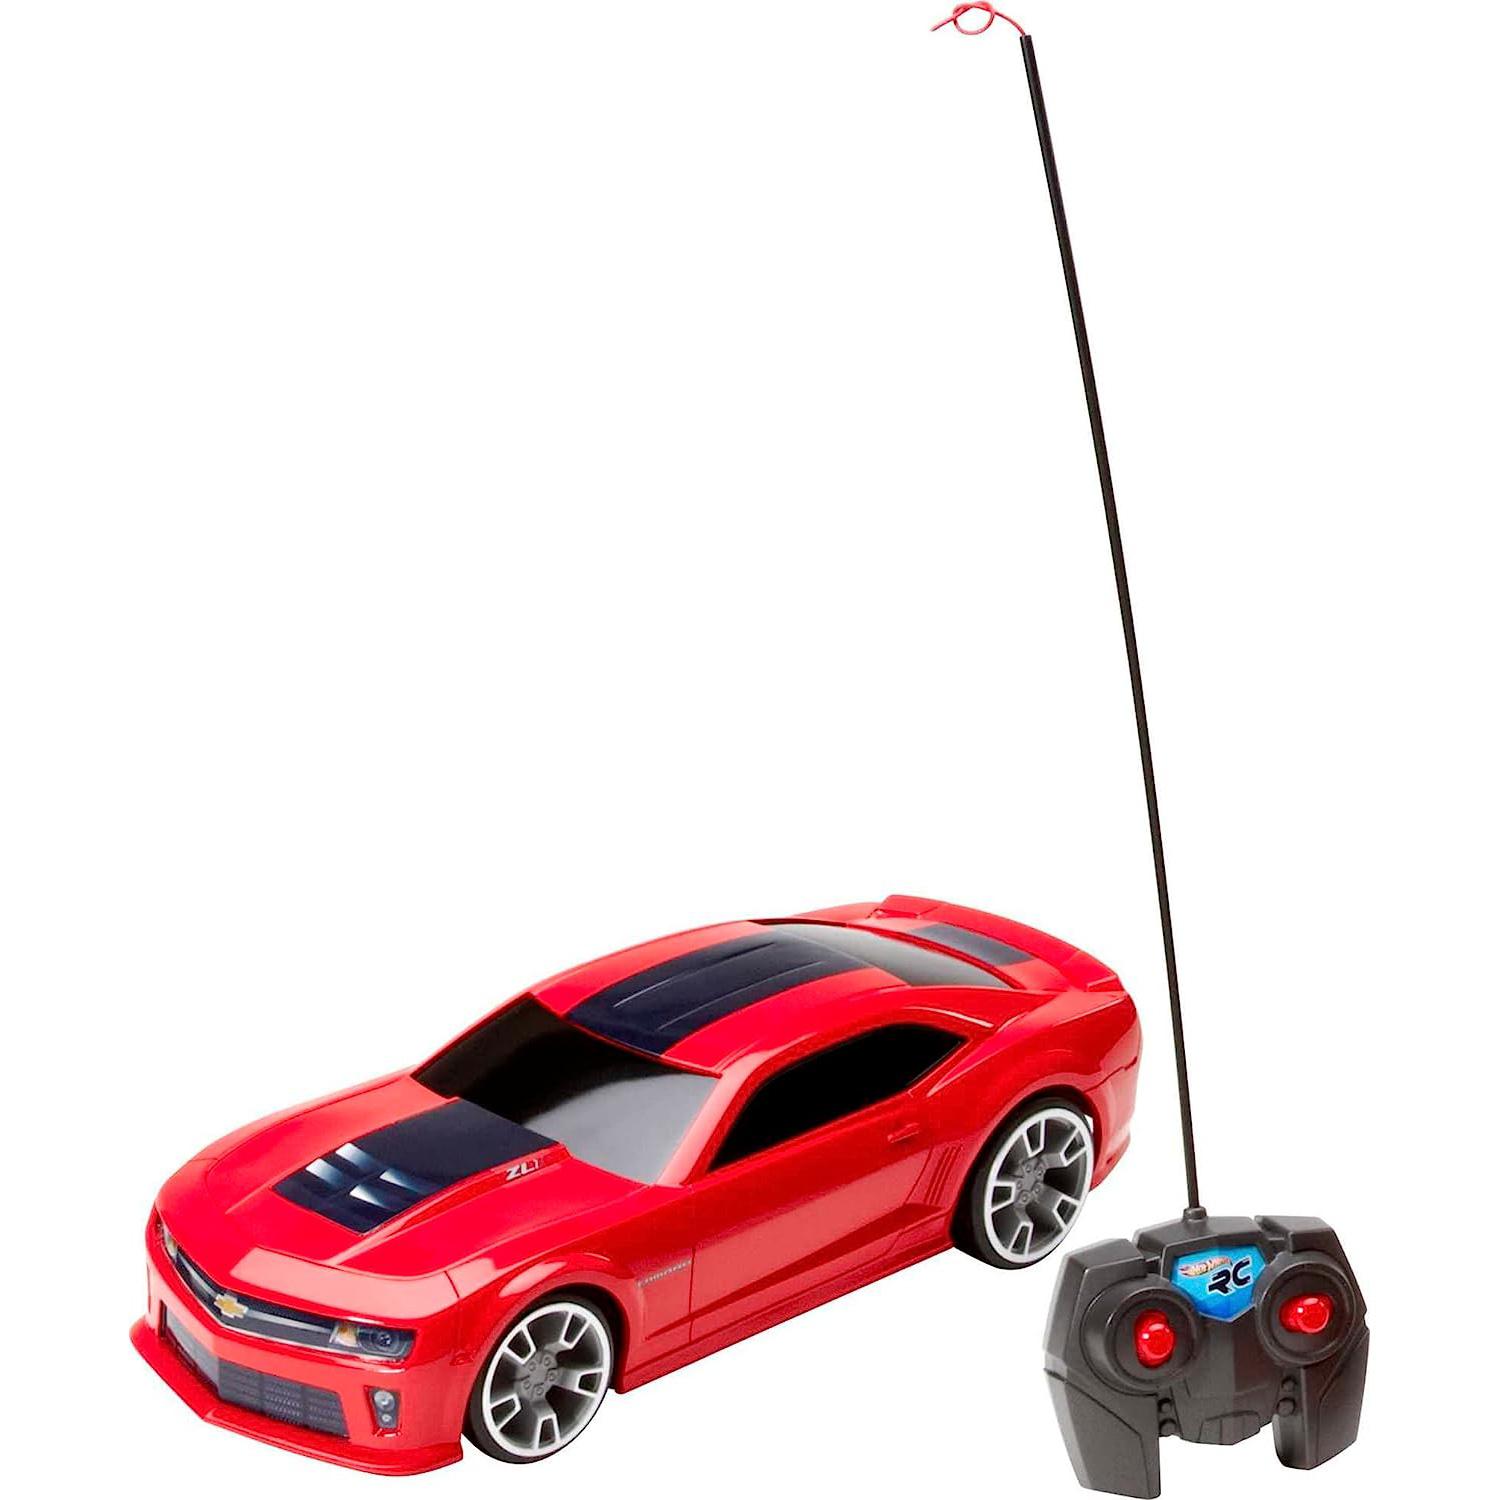 Hot Wheels ZL1 Camaro RC Vehicle Remote Control Car for $12.26